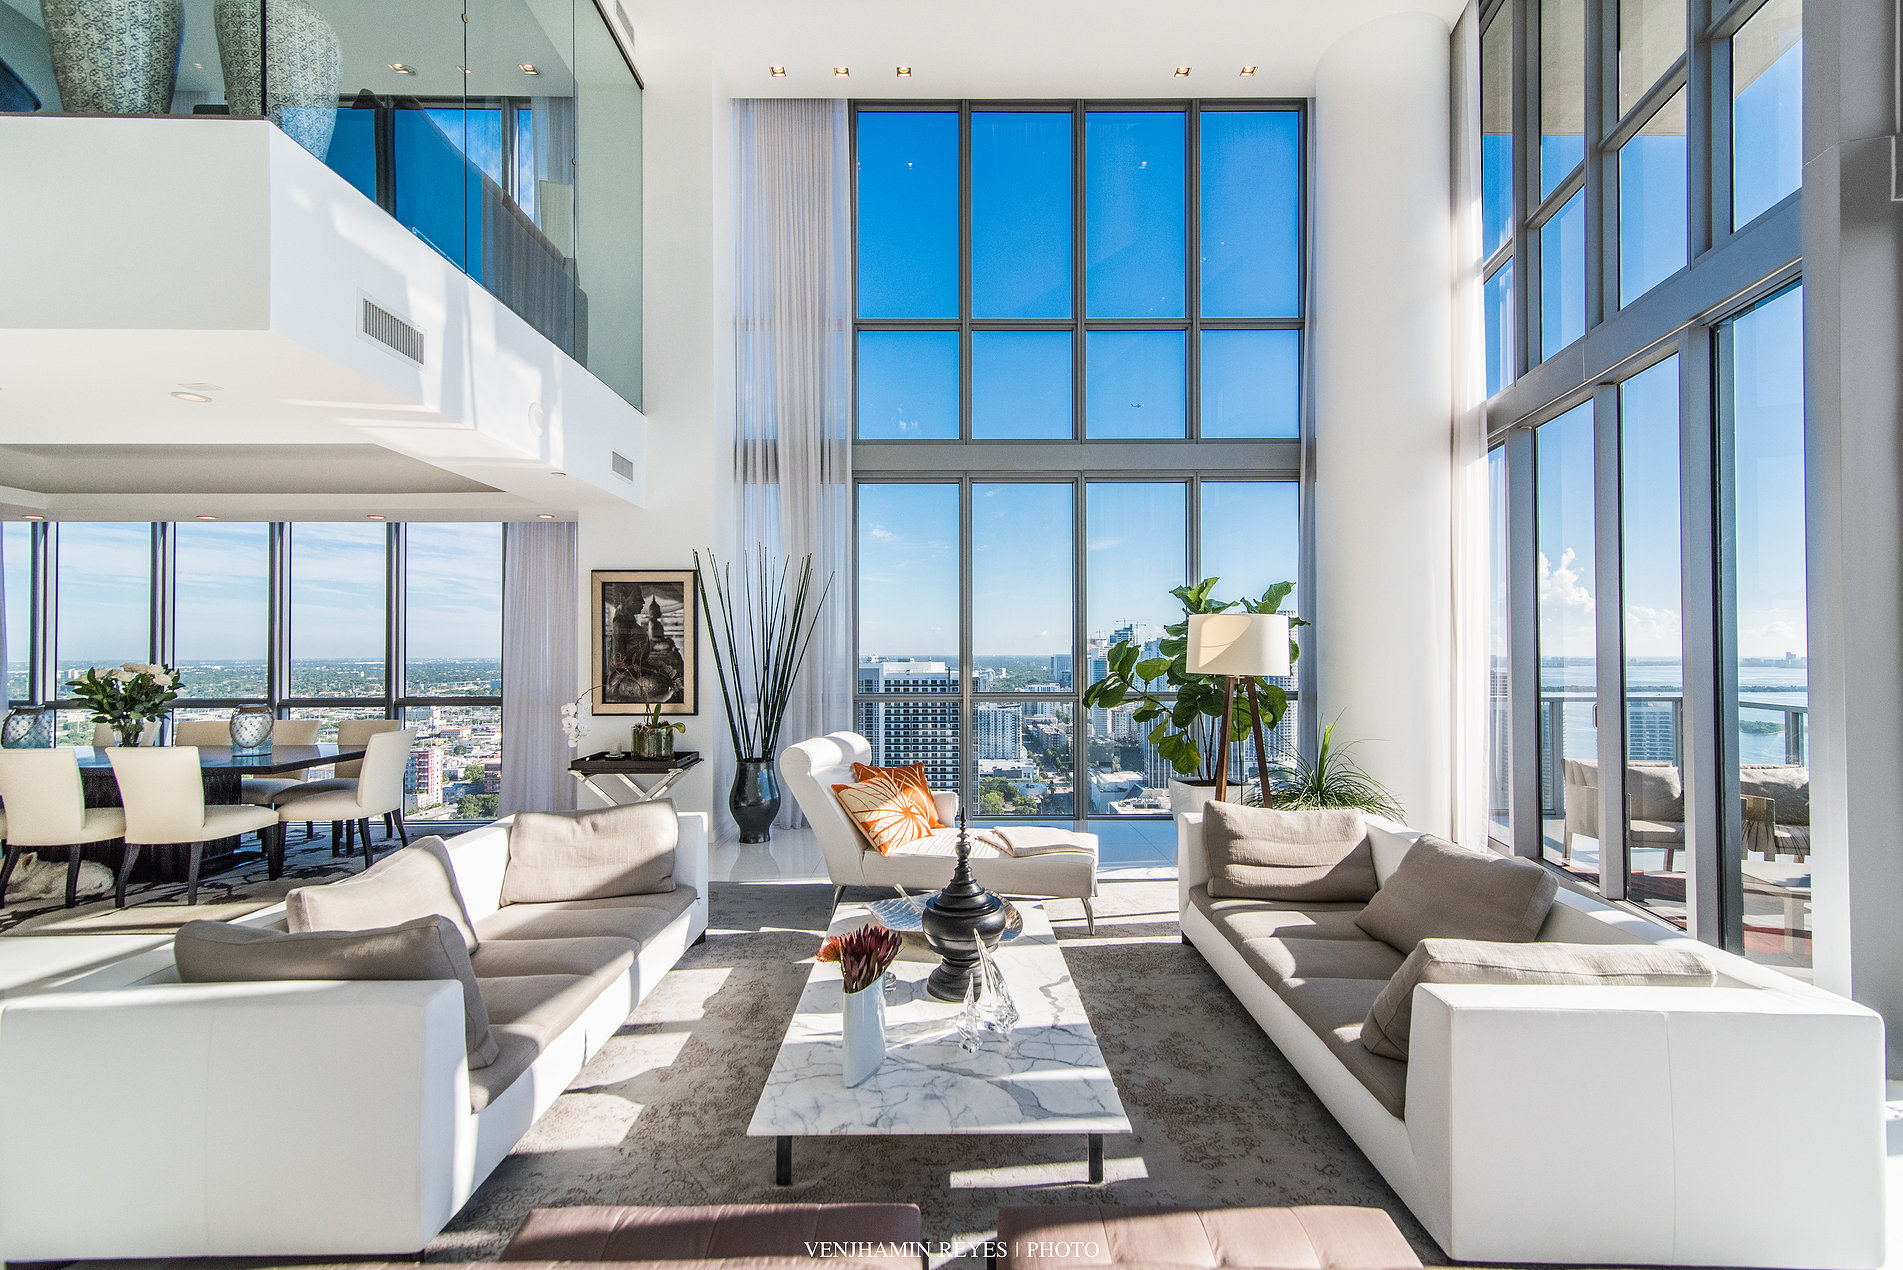 Unit 4107 at Marquis Residences in downtown MIami, featuring a stellar bay view amid a corner living room